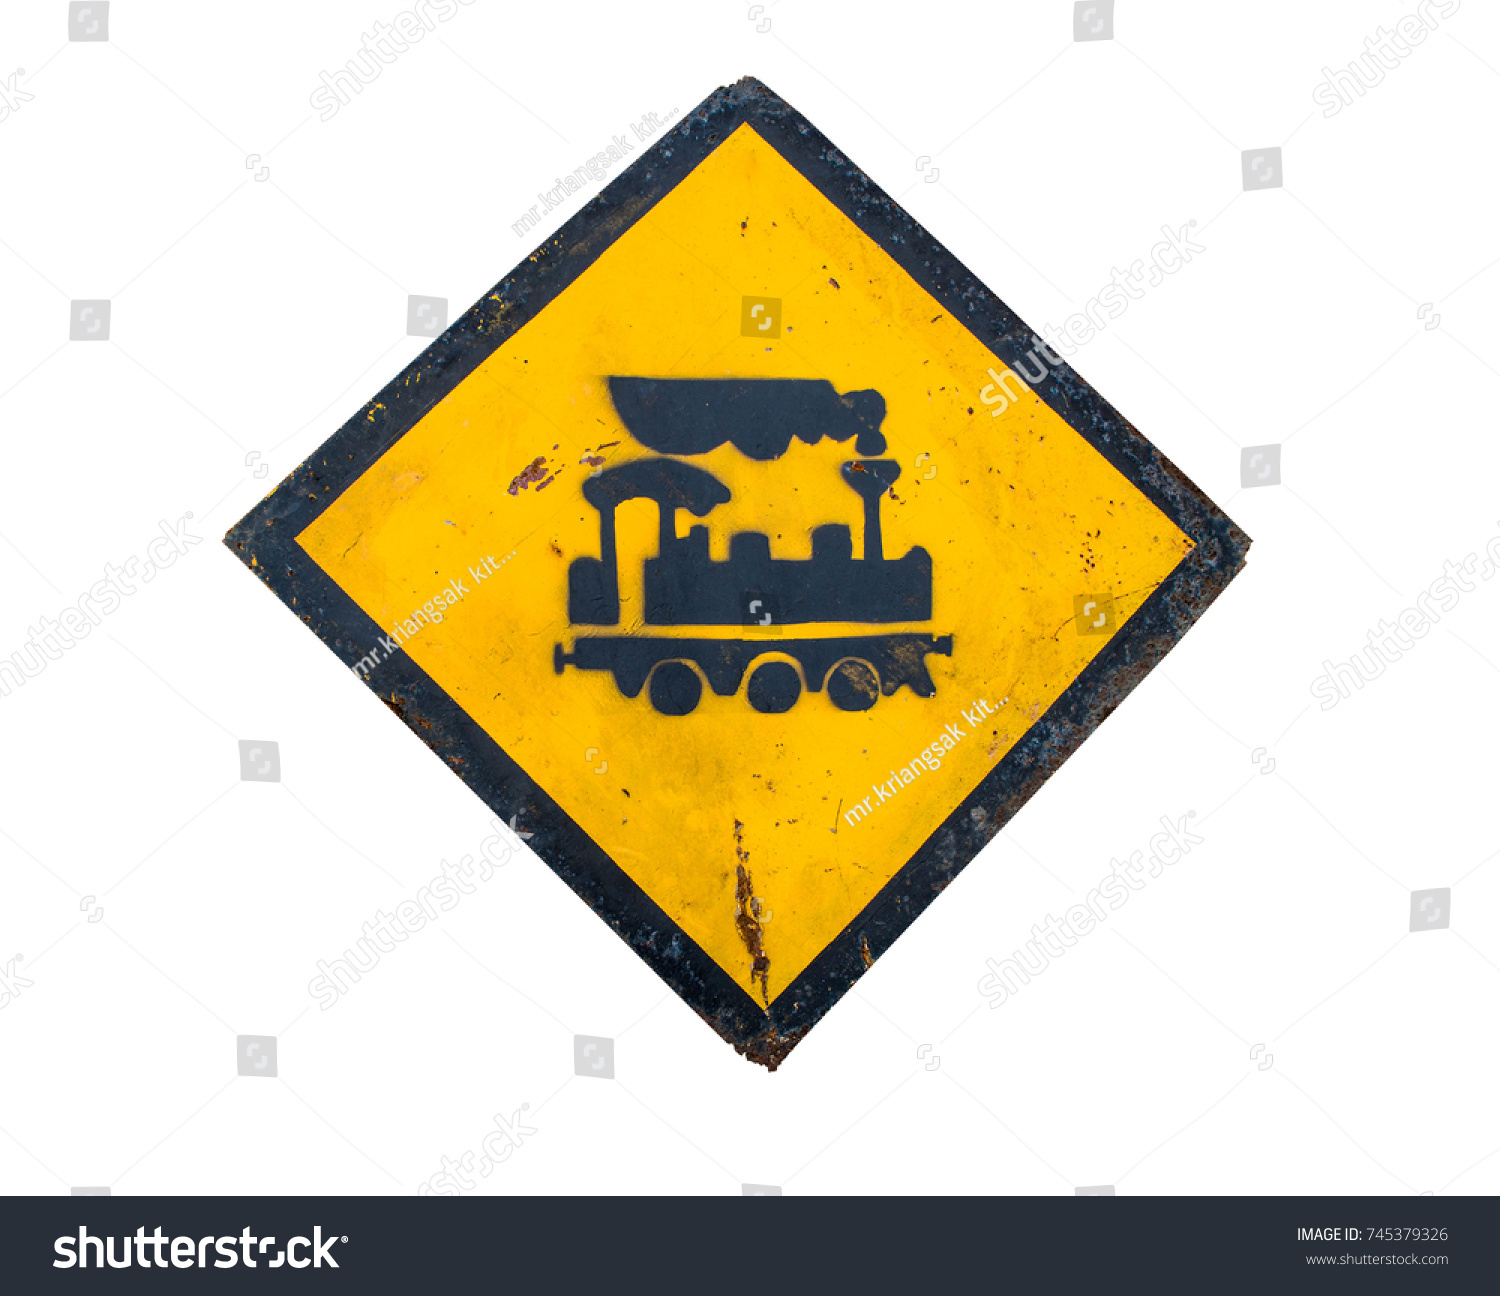 Old and rusty trains sign isolated on white background #745379326